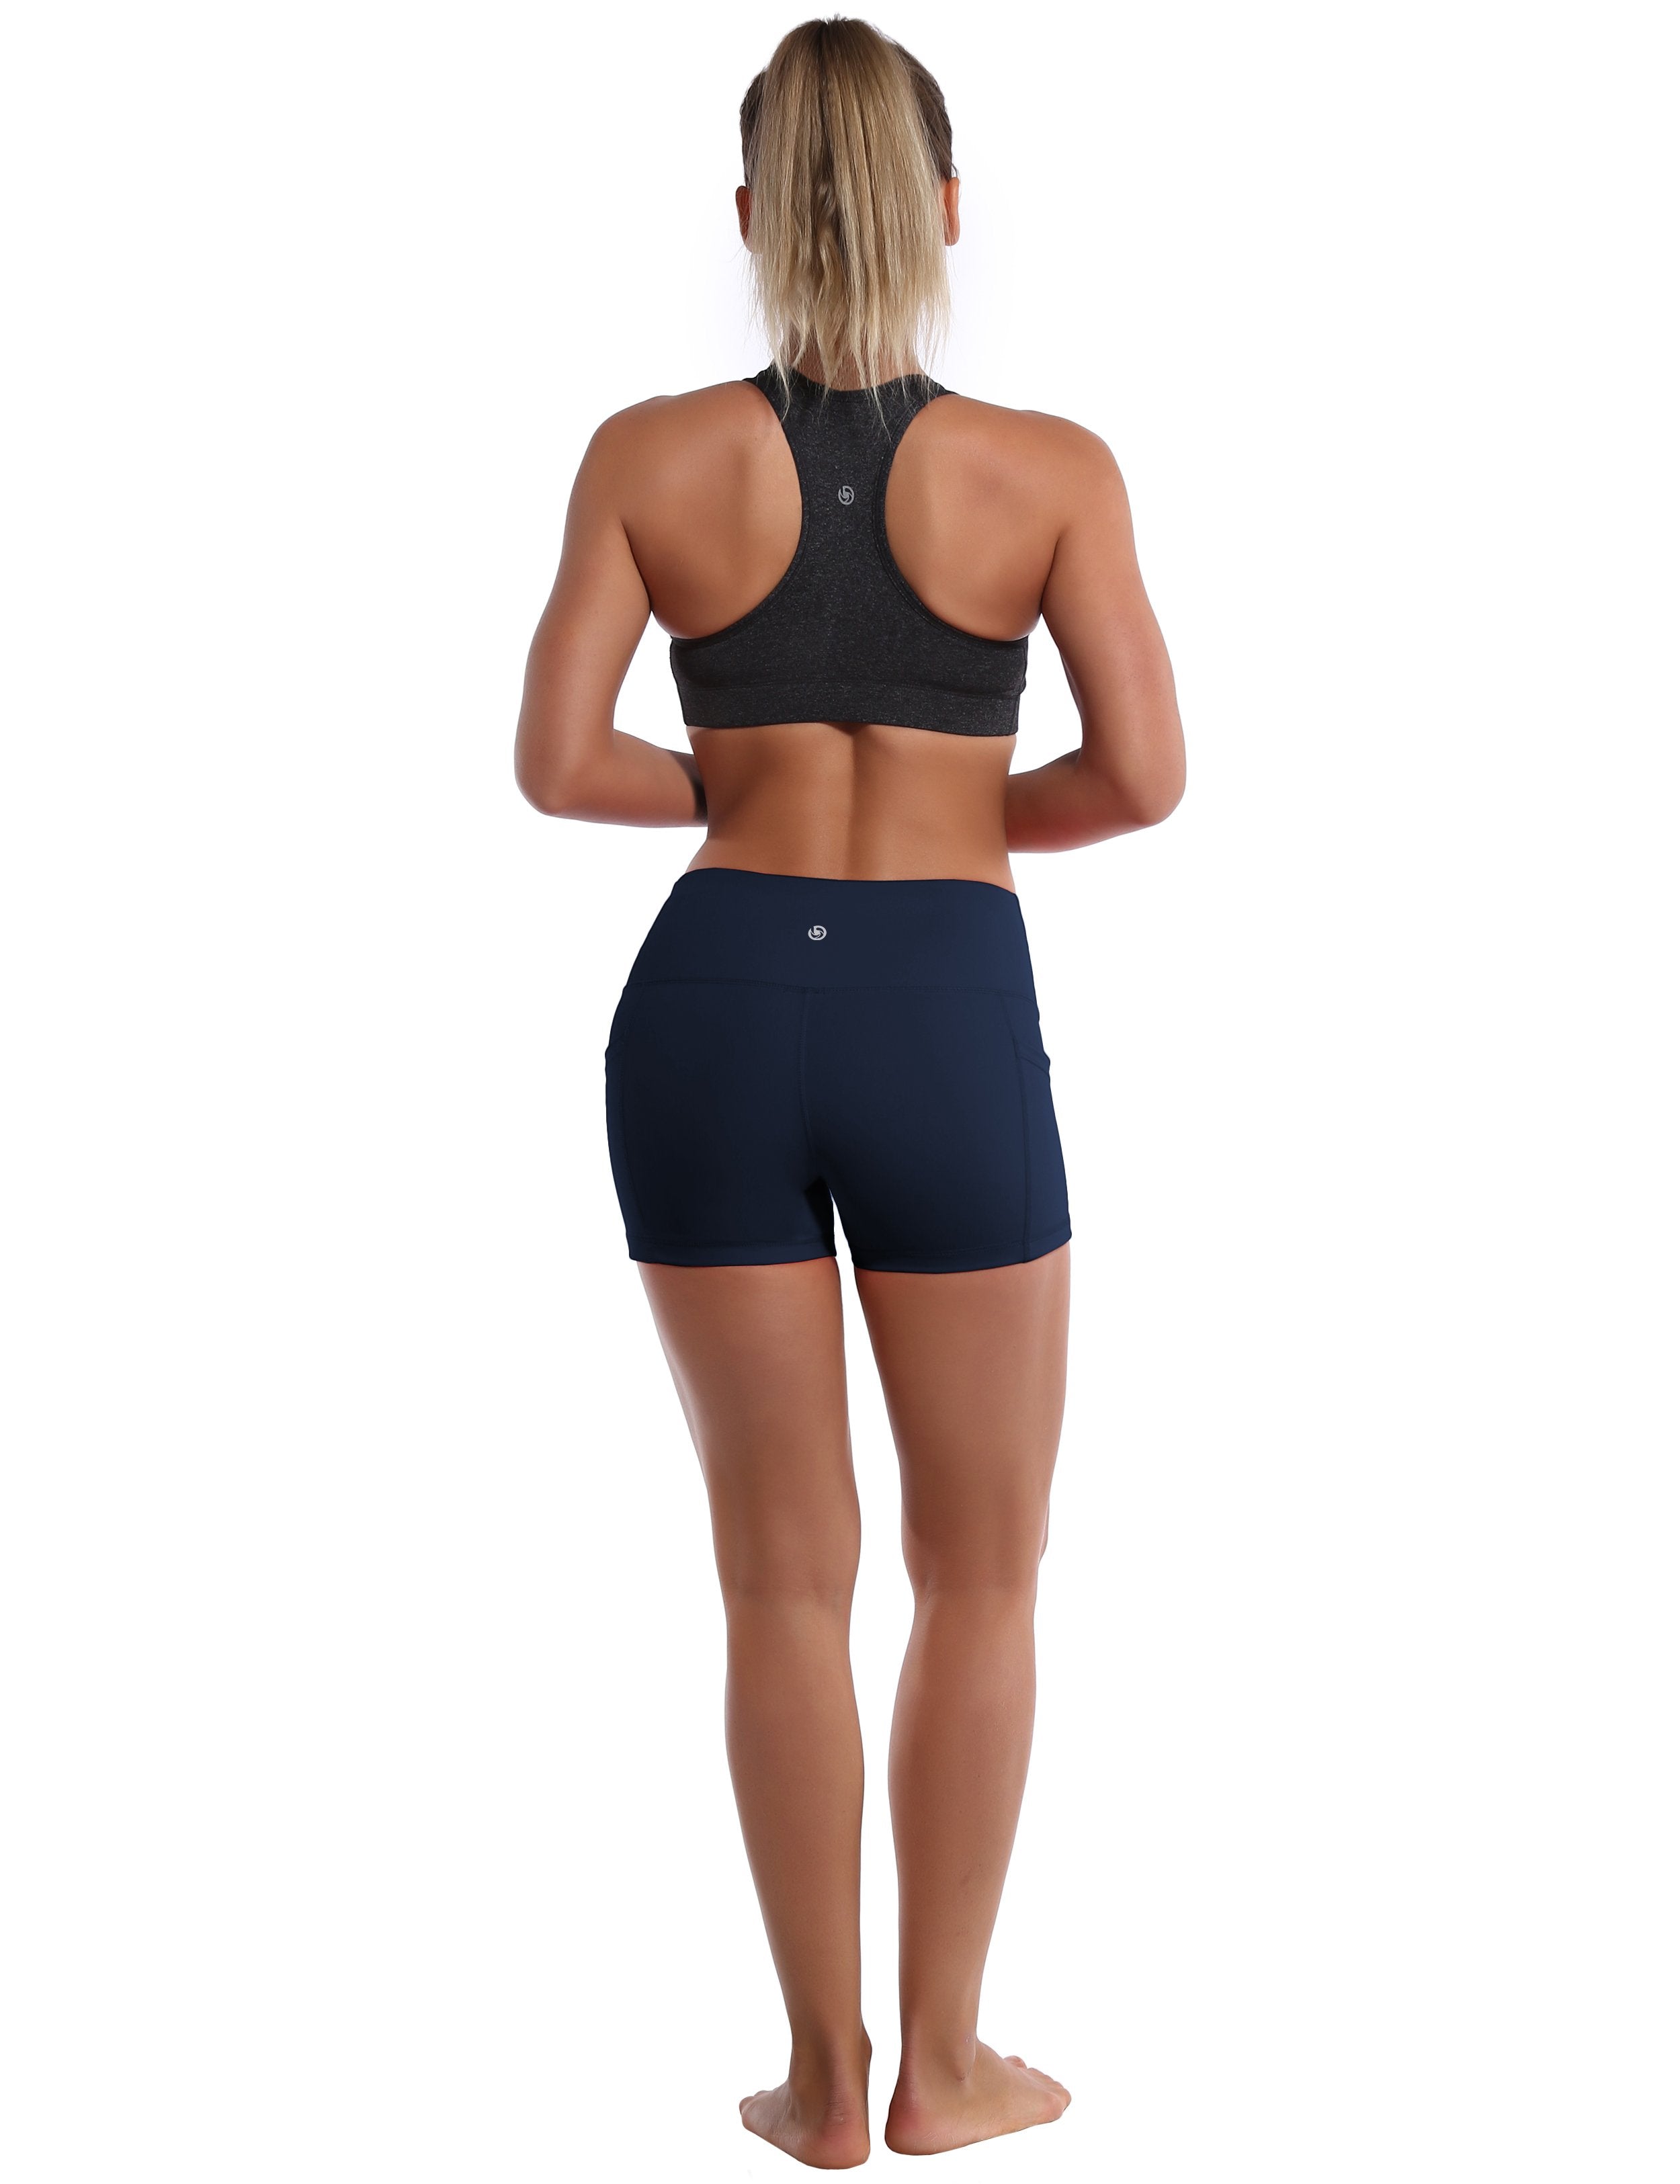 2.5" Side Pockets Jogging Shorts darknavy Sleek, soft, smooth and totally comfortable: our newest sexy style is here. Softest-ever fabric High elasticity High density 4-way stretch Fabric doesn't attract lint easily No see-through Moisture-wicking Machine wash 78% Polyester, 22% Spandex